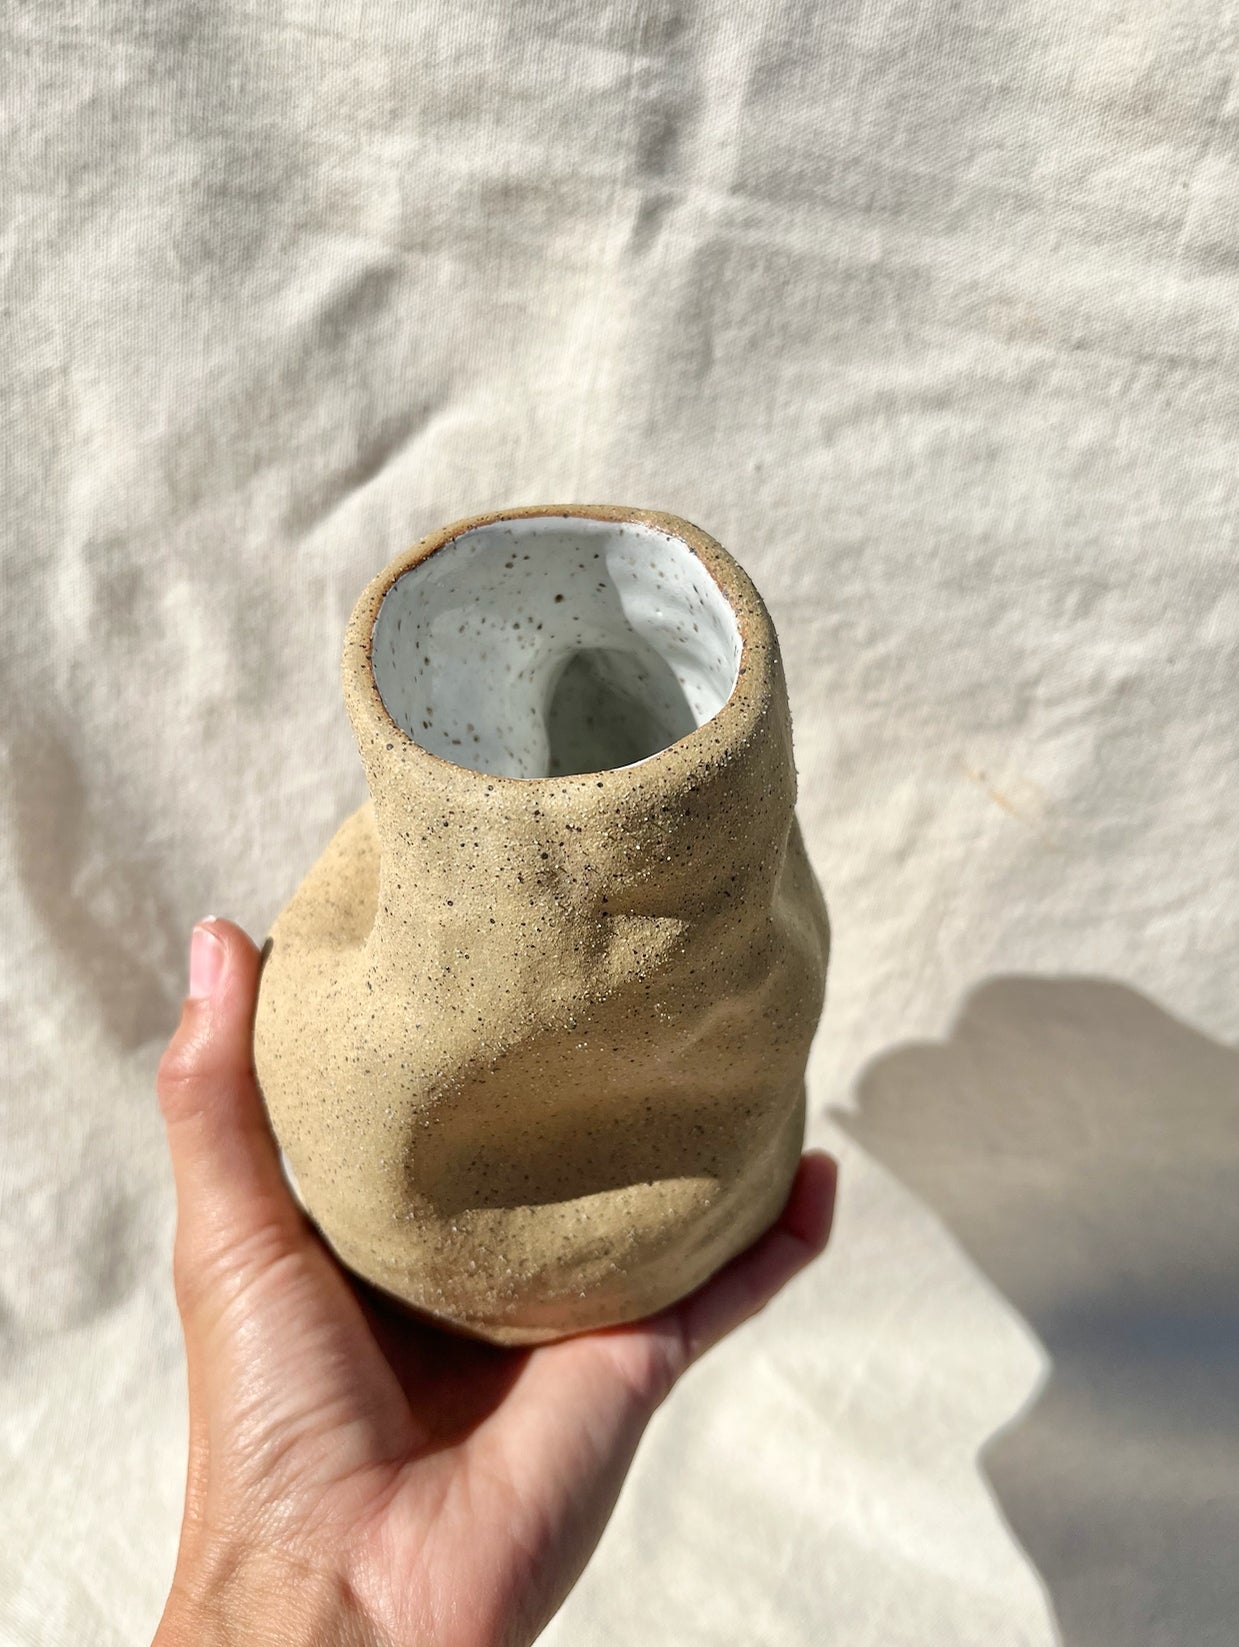 An organic vase with a speckled, textured clay body and white glaze on the inside. A vase for your fresh or dried flowers, yes… but also an alcove to place a teeny treasure to compliment them. Hand built, glazed and fired in Slo, Ca.